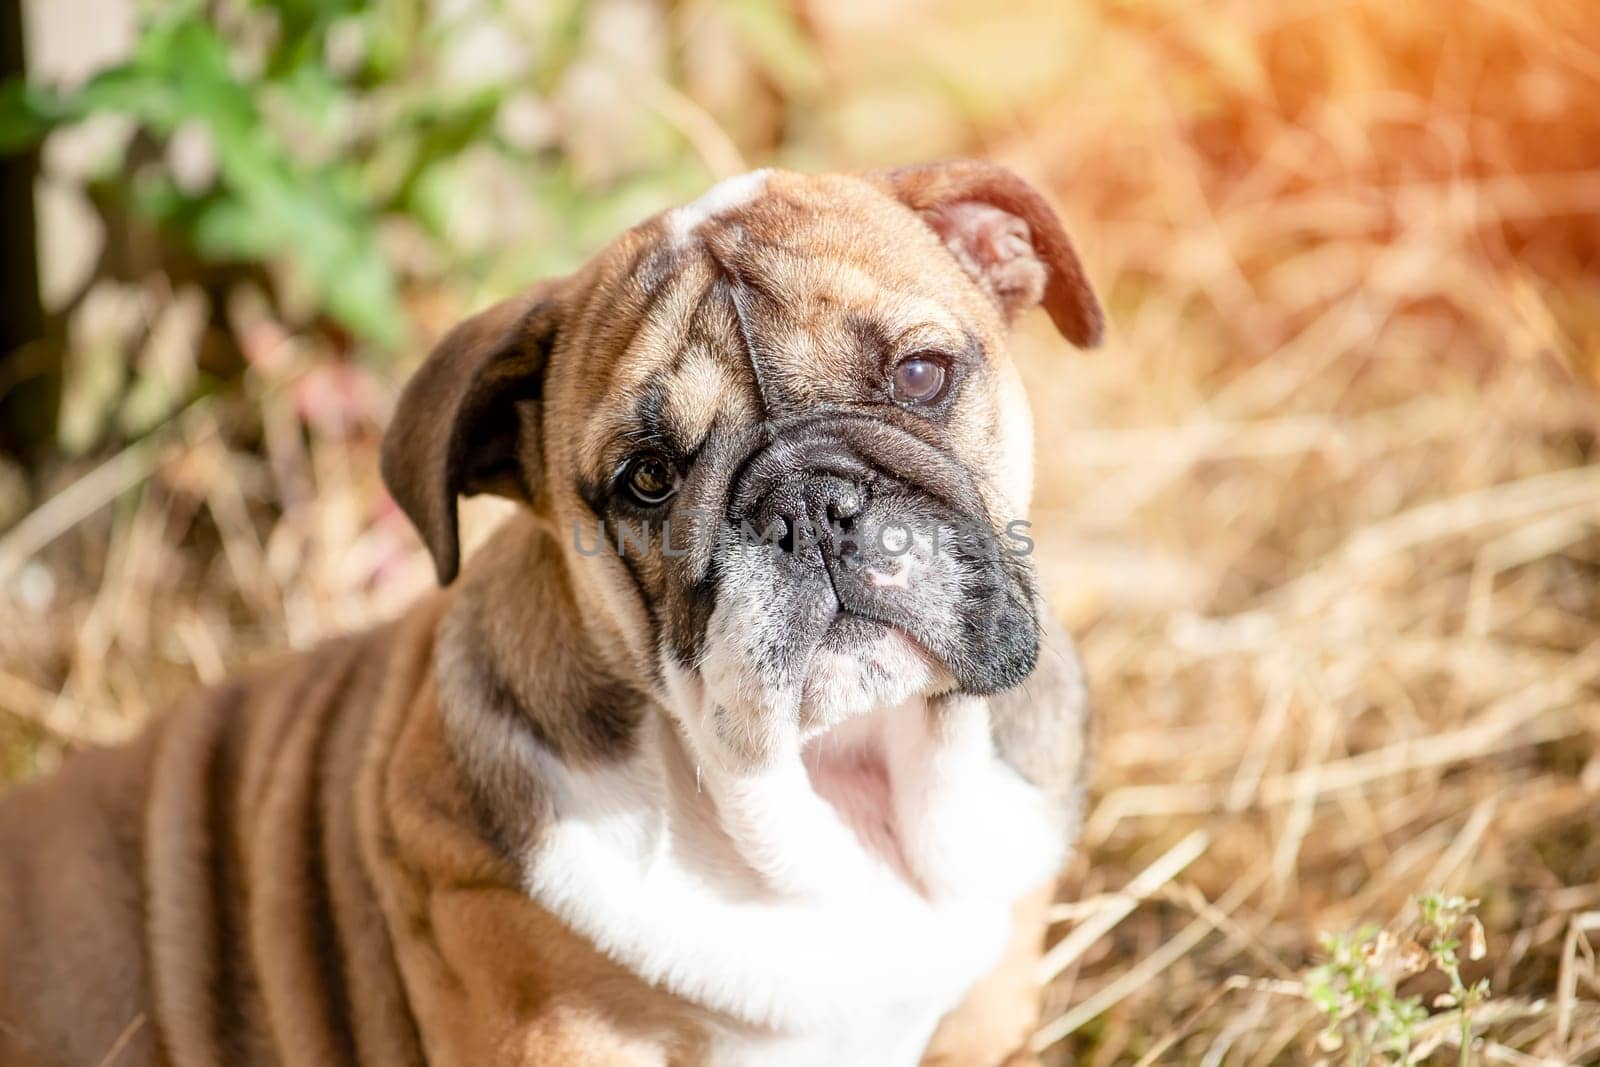 Puppy of Red English Bulldog out for a walk playing, sitting on grass